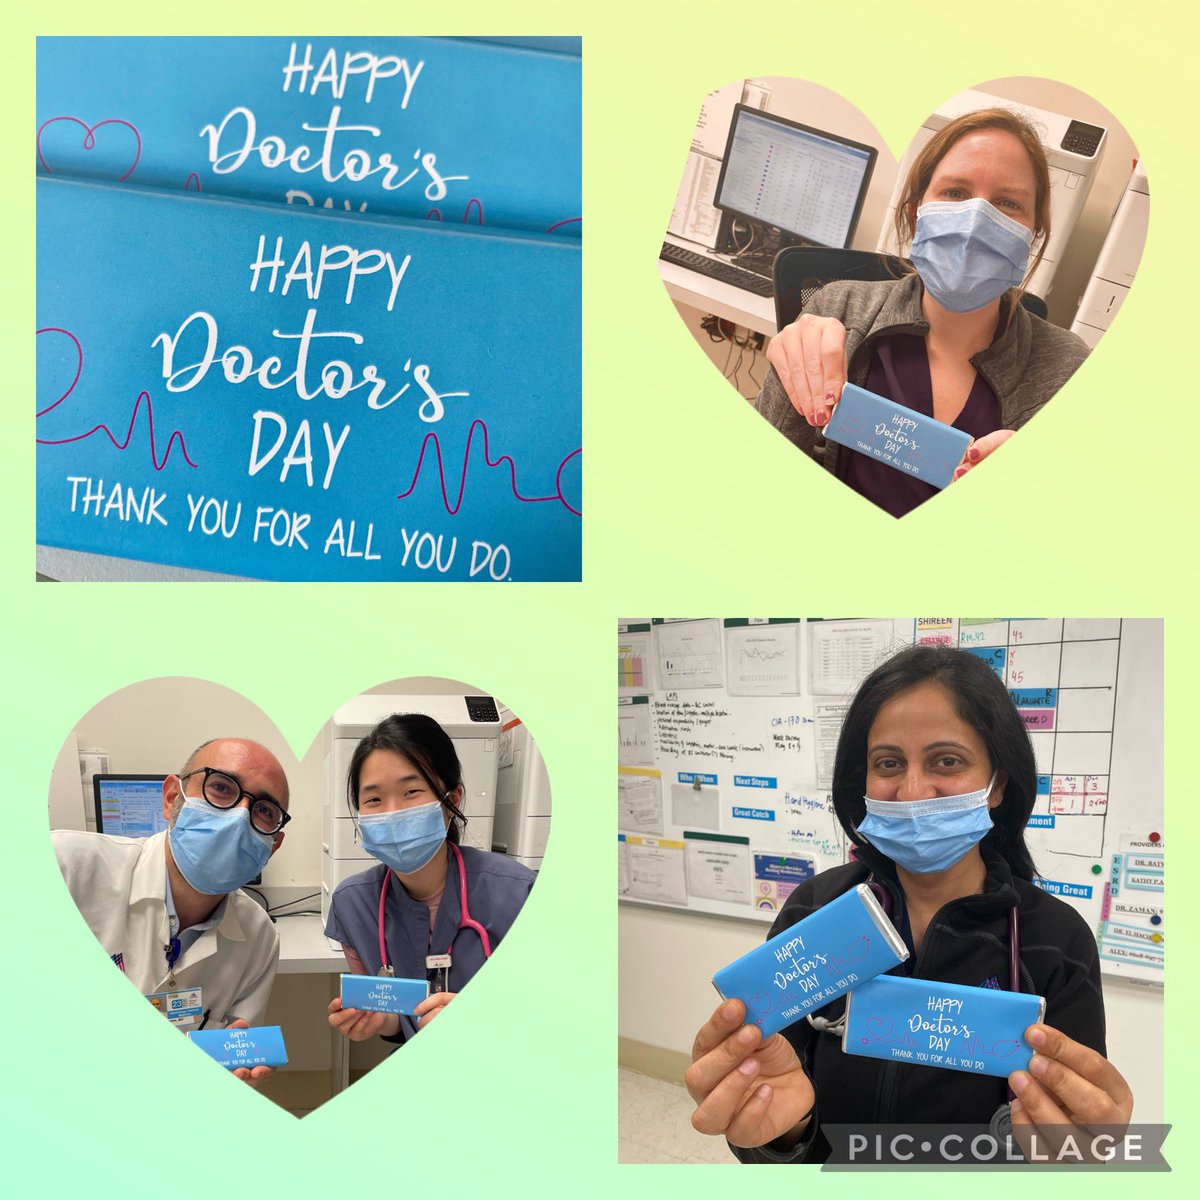 Happy national Doctor’s day !! We appreciate our nephrologists at @MSMorningside. They are the best partner in patient care. We (nurses) love them ❤️ #doctorsday #thankyoudocs @mcrsinanan @ronsjvill @brianradbill @BethOliverVP @KathleenPDory2 @kellyanne1654 @MichelleDunnRN